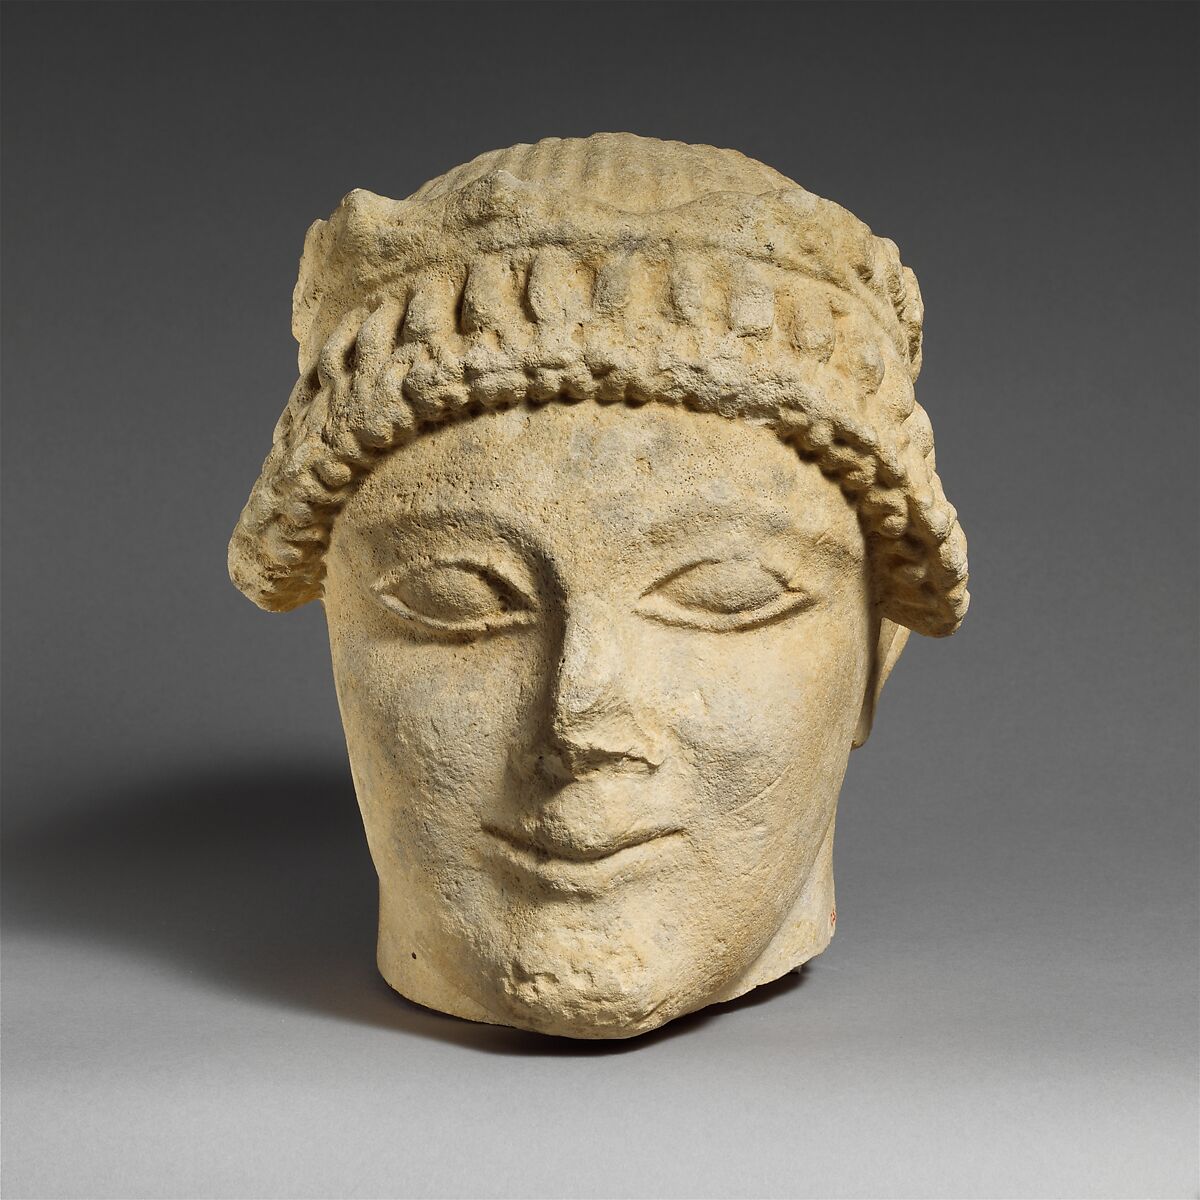 Limestone head of a beardless male votary with a wreath of leaves, Limestone, Cypriot 